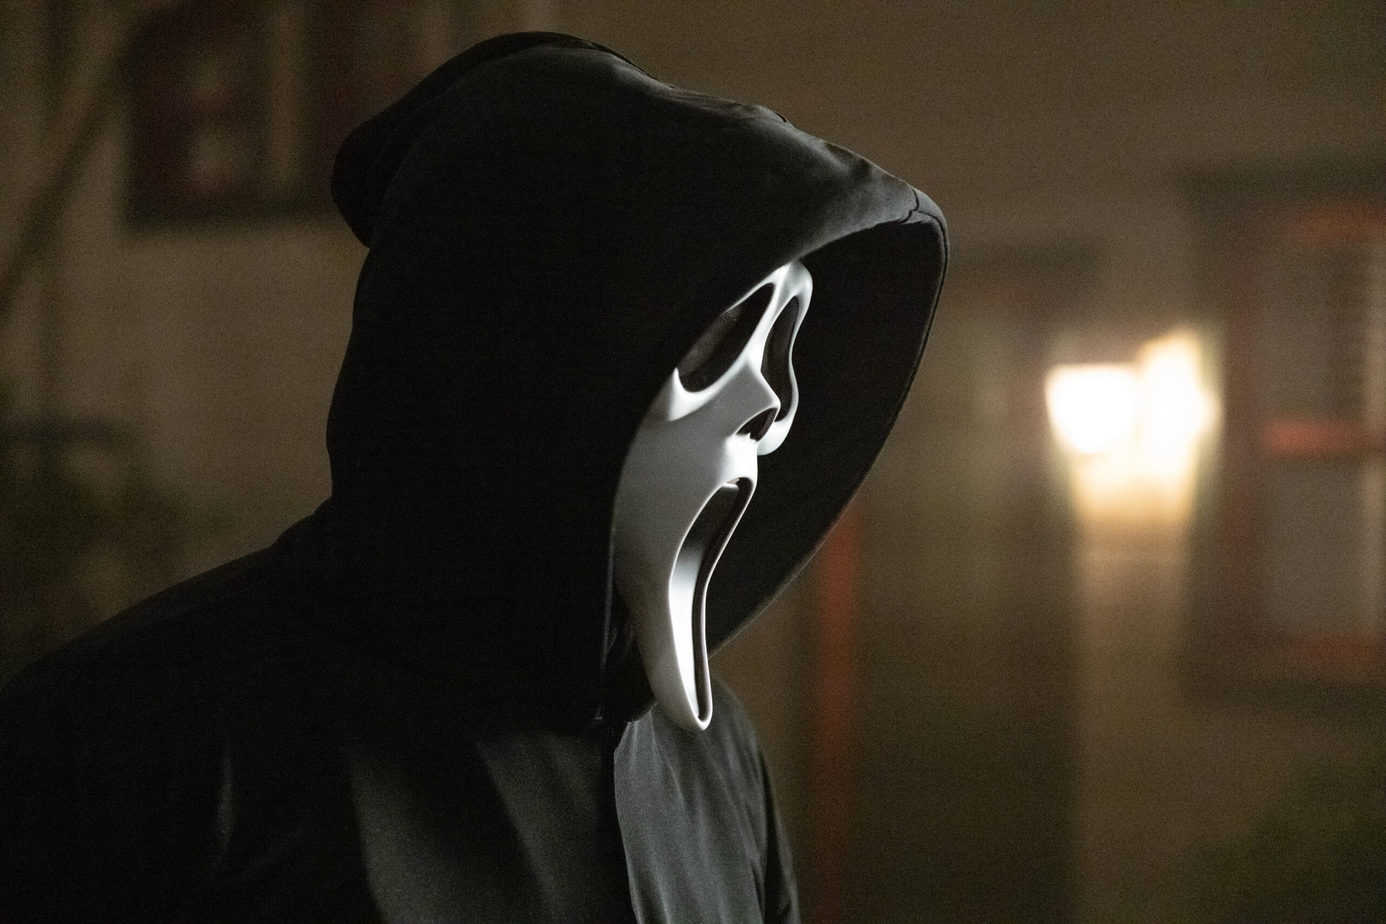 scream parents movie guide and review. Ghostface killer. 